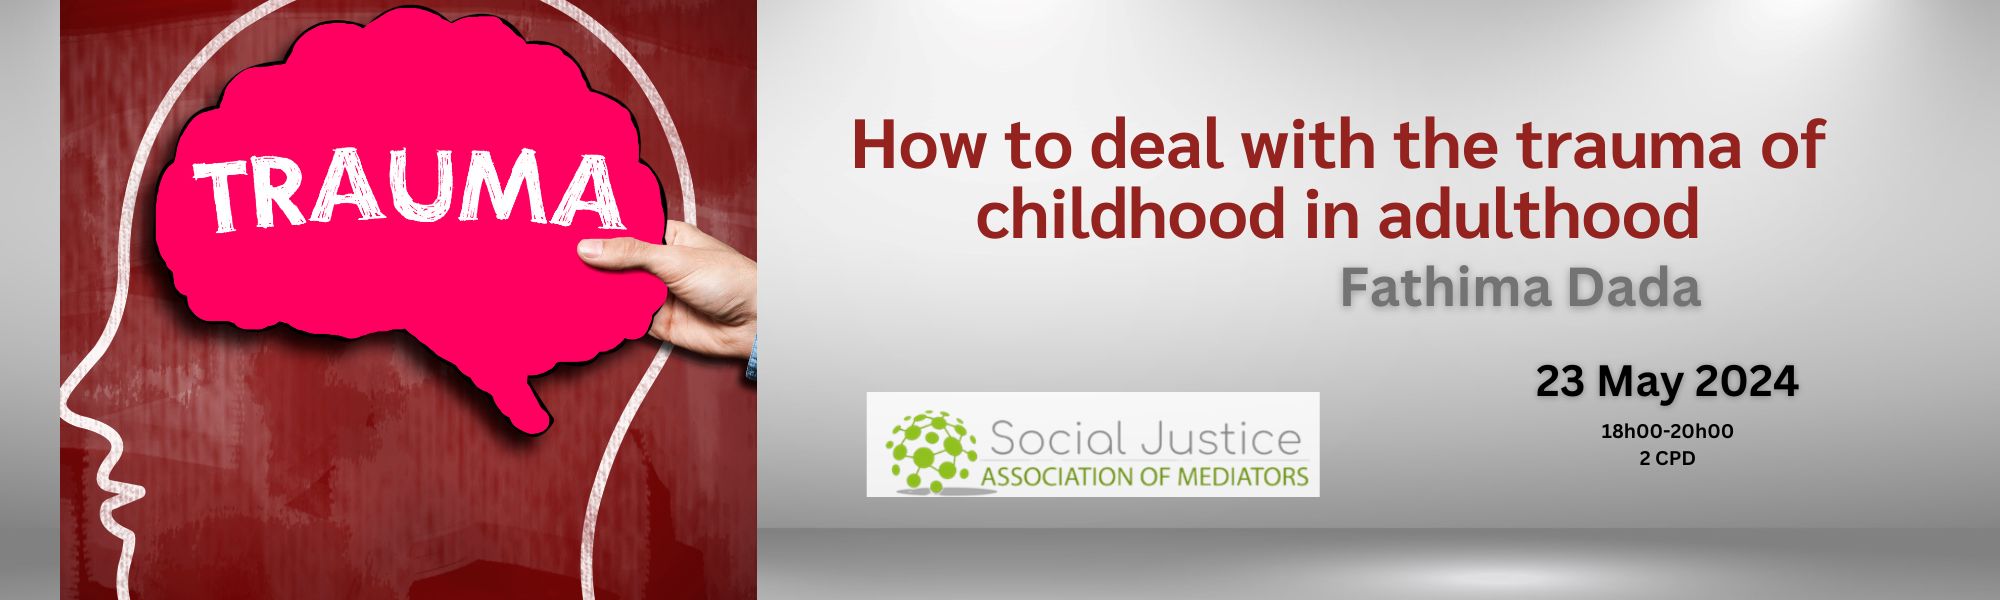 How to deal with the trauma of childhood in adulthood